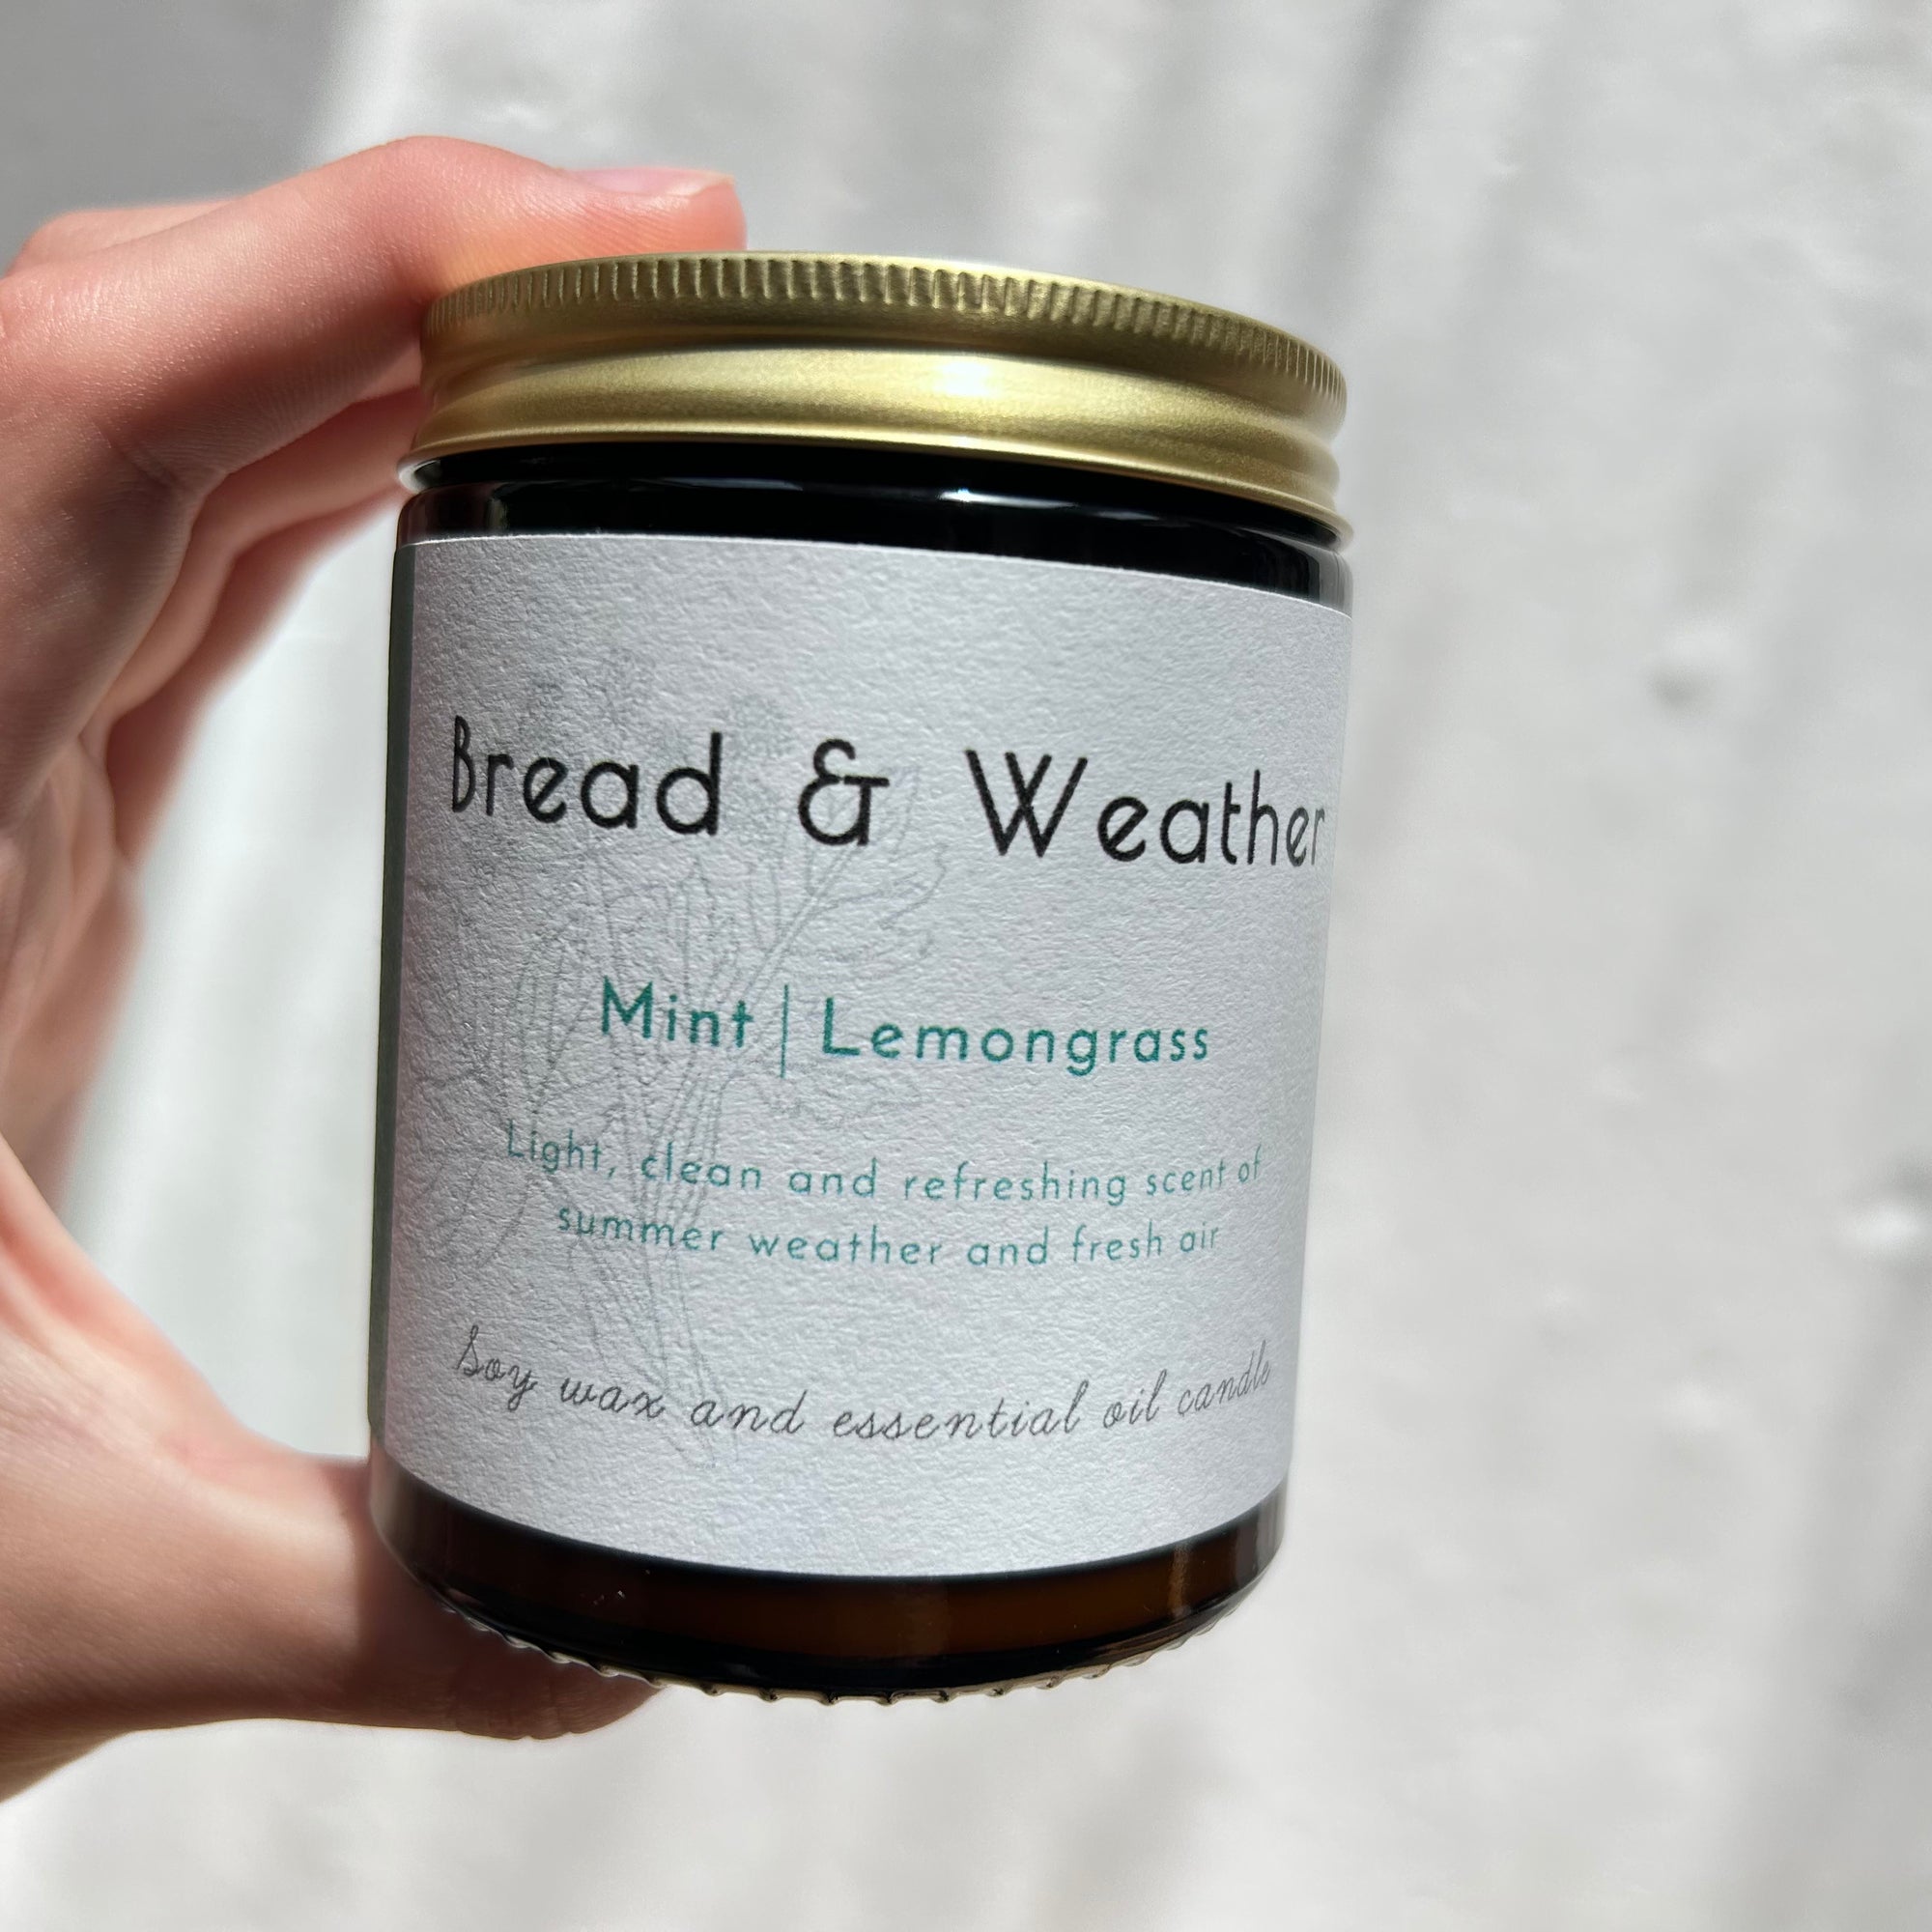 Mint & Lemongrass Candle, Bread & Weather